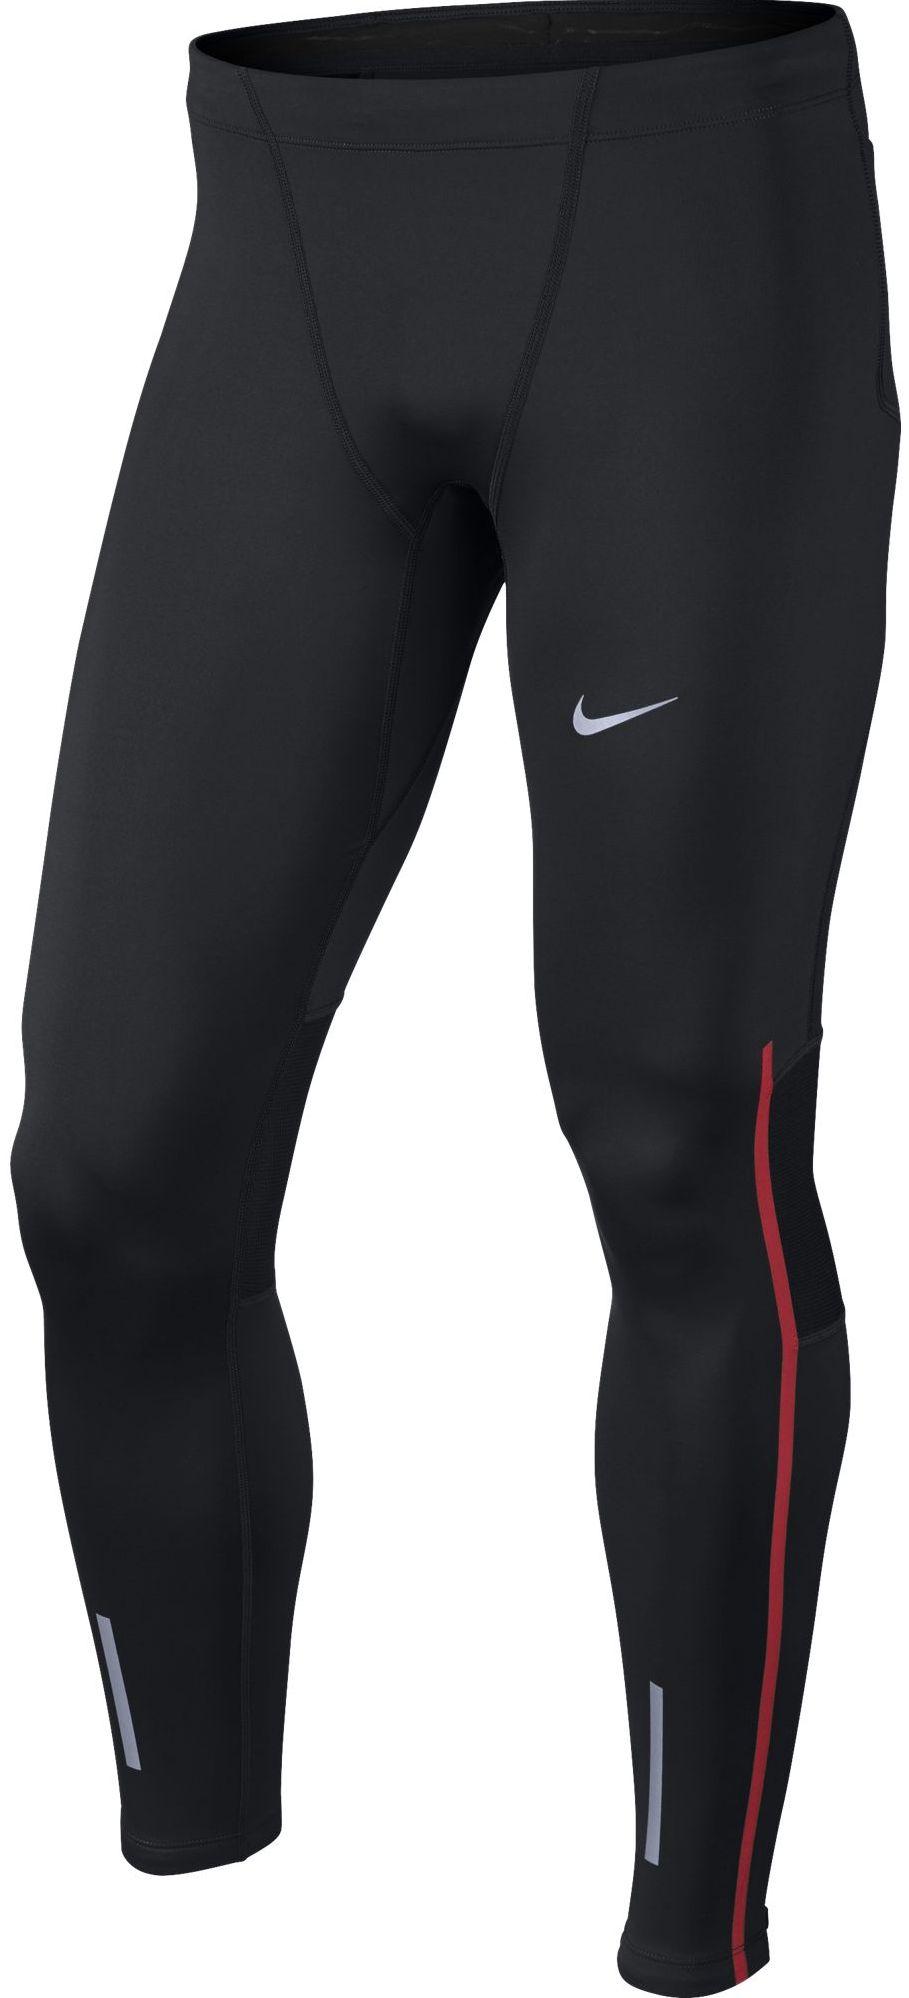 TECH TIGHT - Men´s elasticated trousers